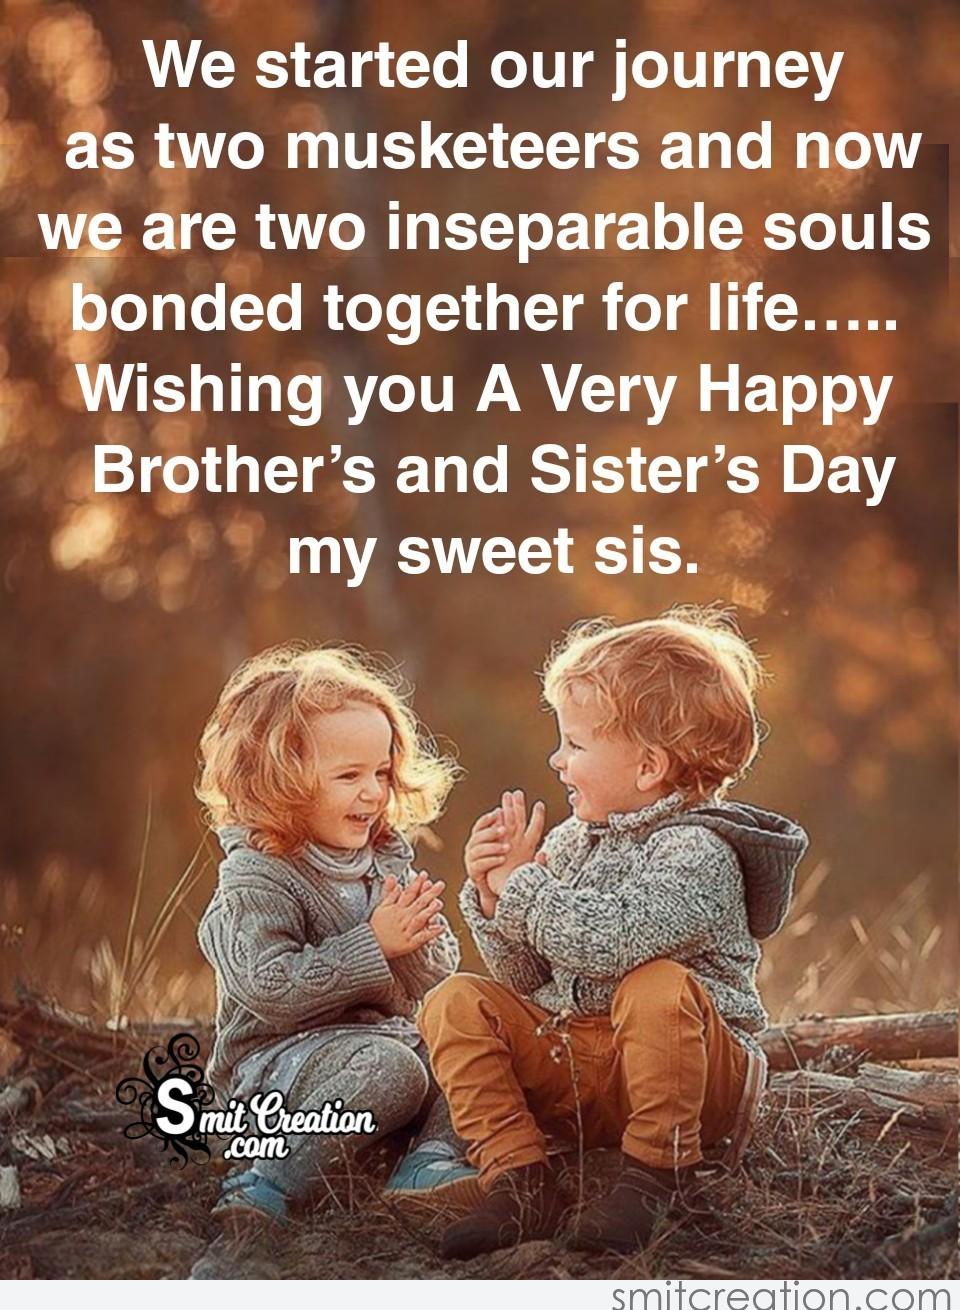 Wishing You A Very Happy Brothers Sisters Day - SmitCreation.com